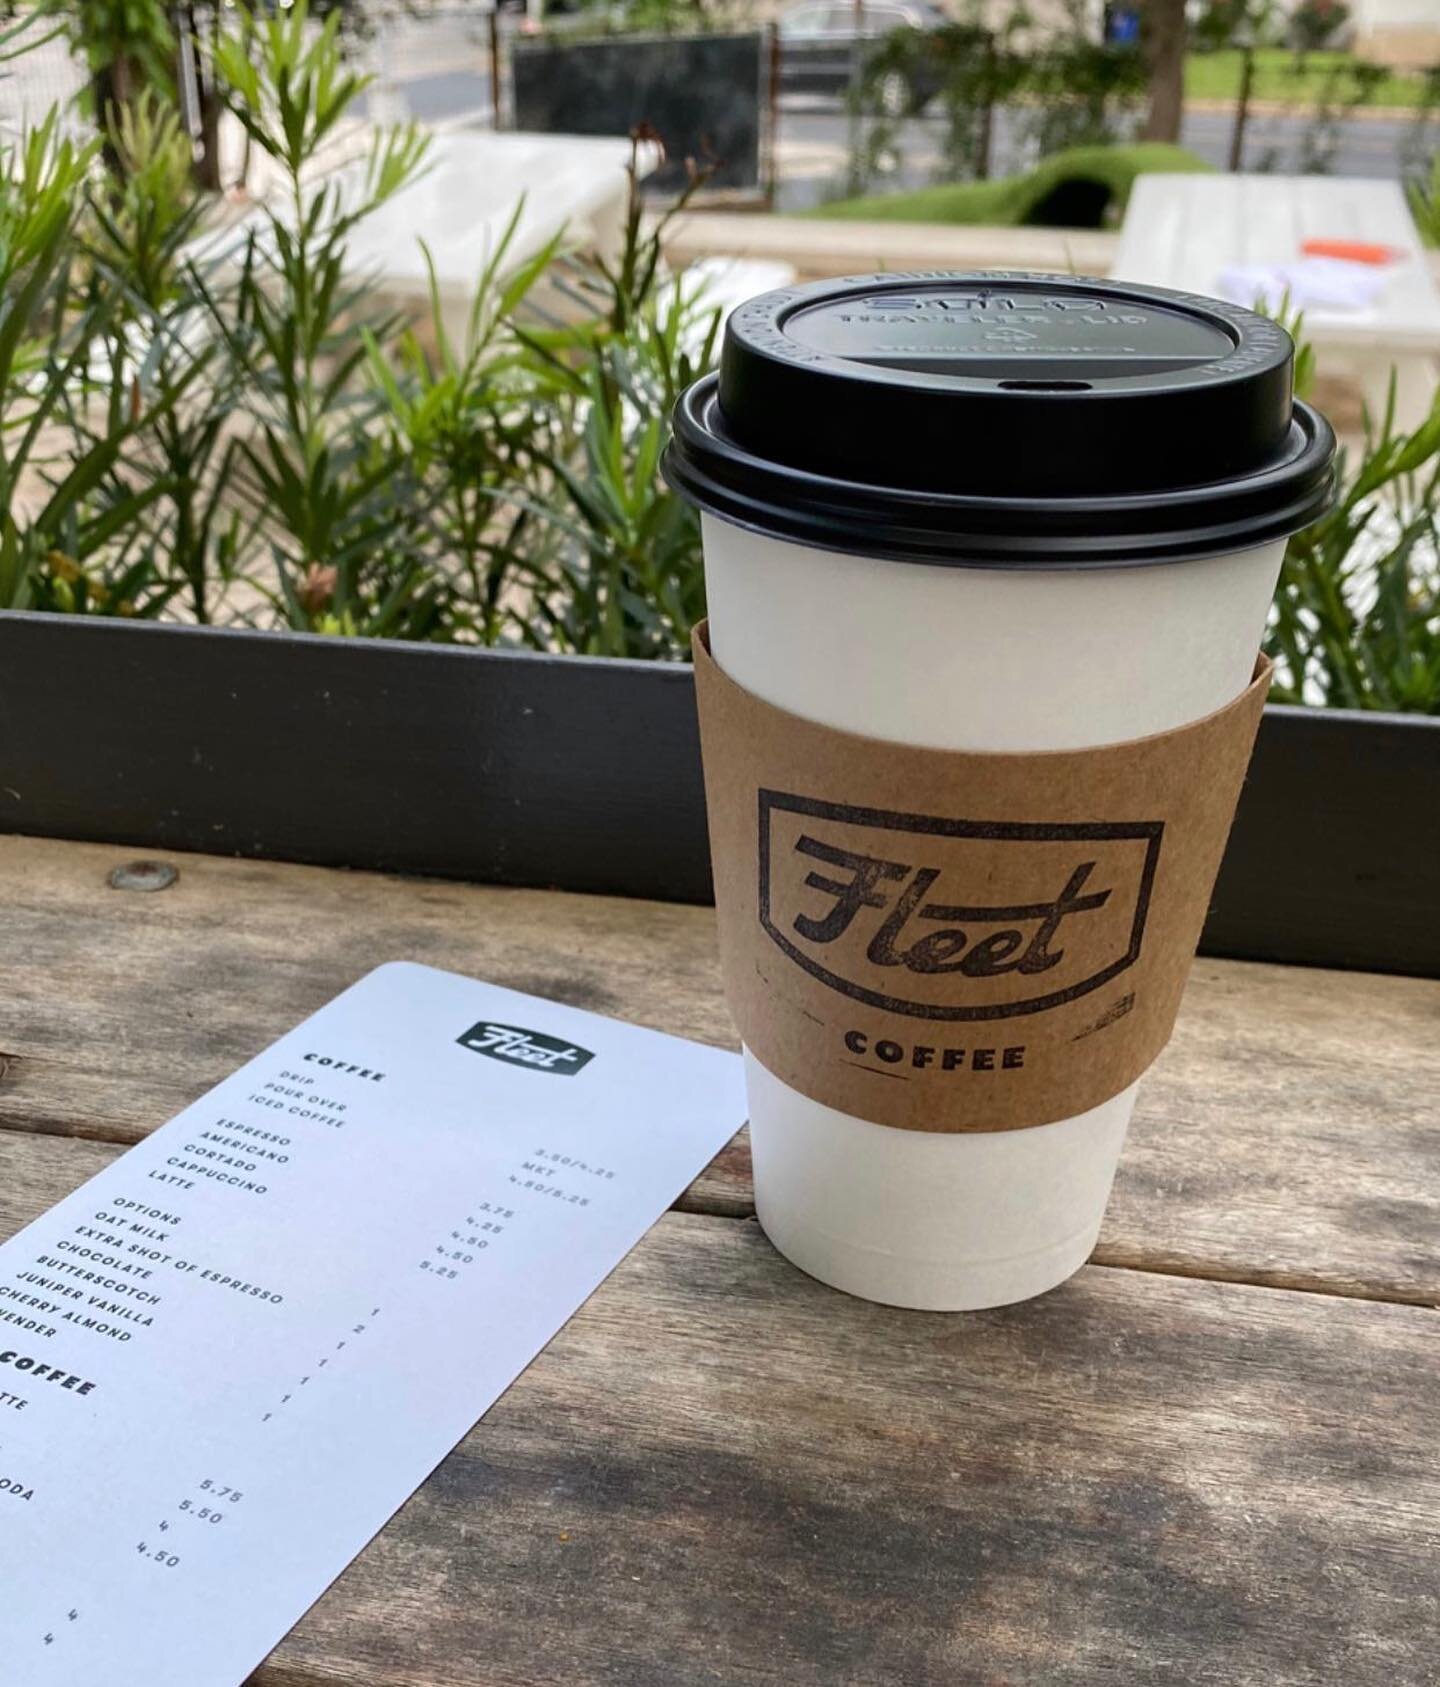 Thank you for everyone who came out to support @fleetcoffeeco to celebrate their last weekend @littlefieldsatx. 

@fleetcoffeeco will be opening their new location this coming Friday at 2806 Manor Road, Austin TX 78722. 

Truly exceptional coffee bre